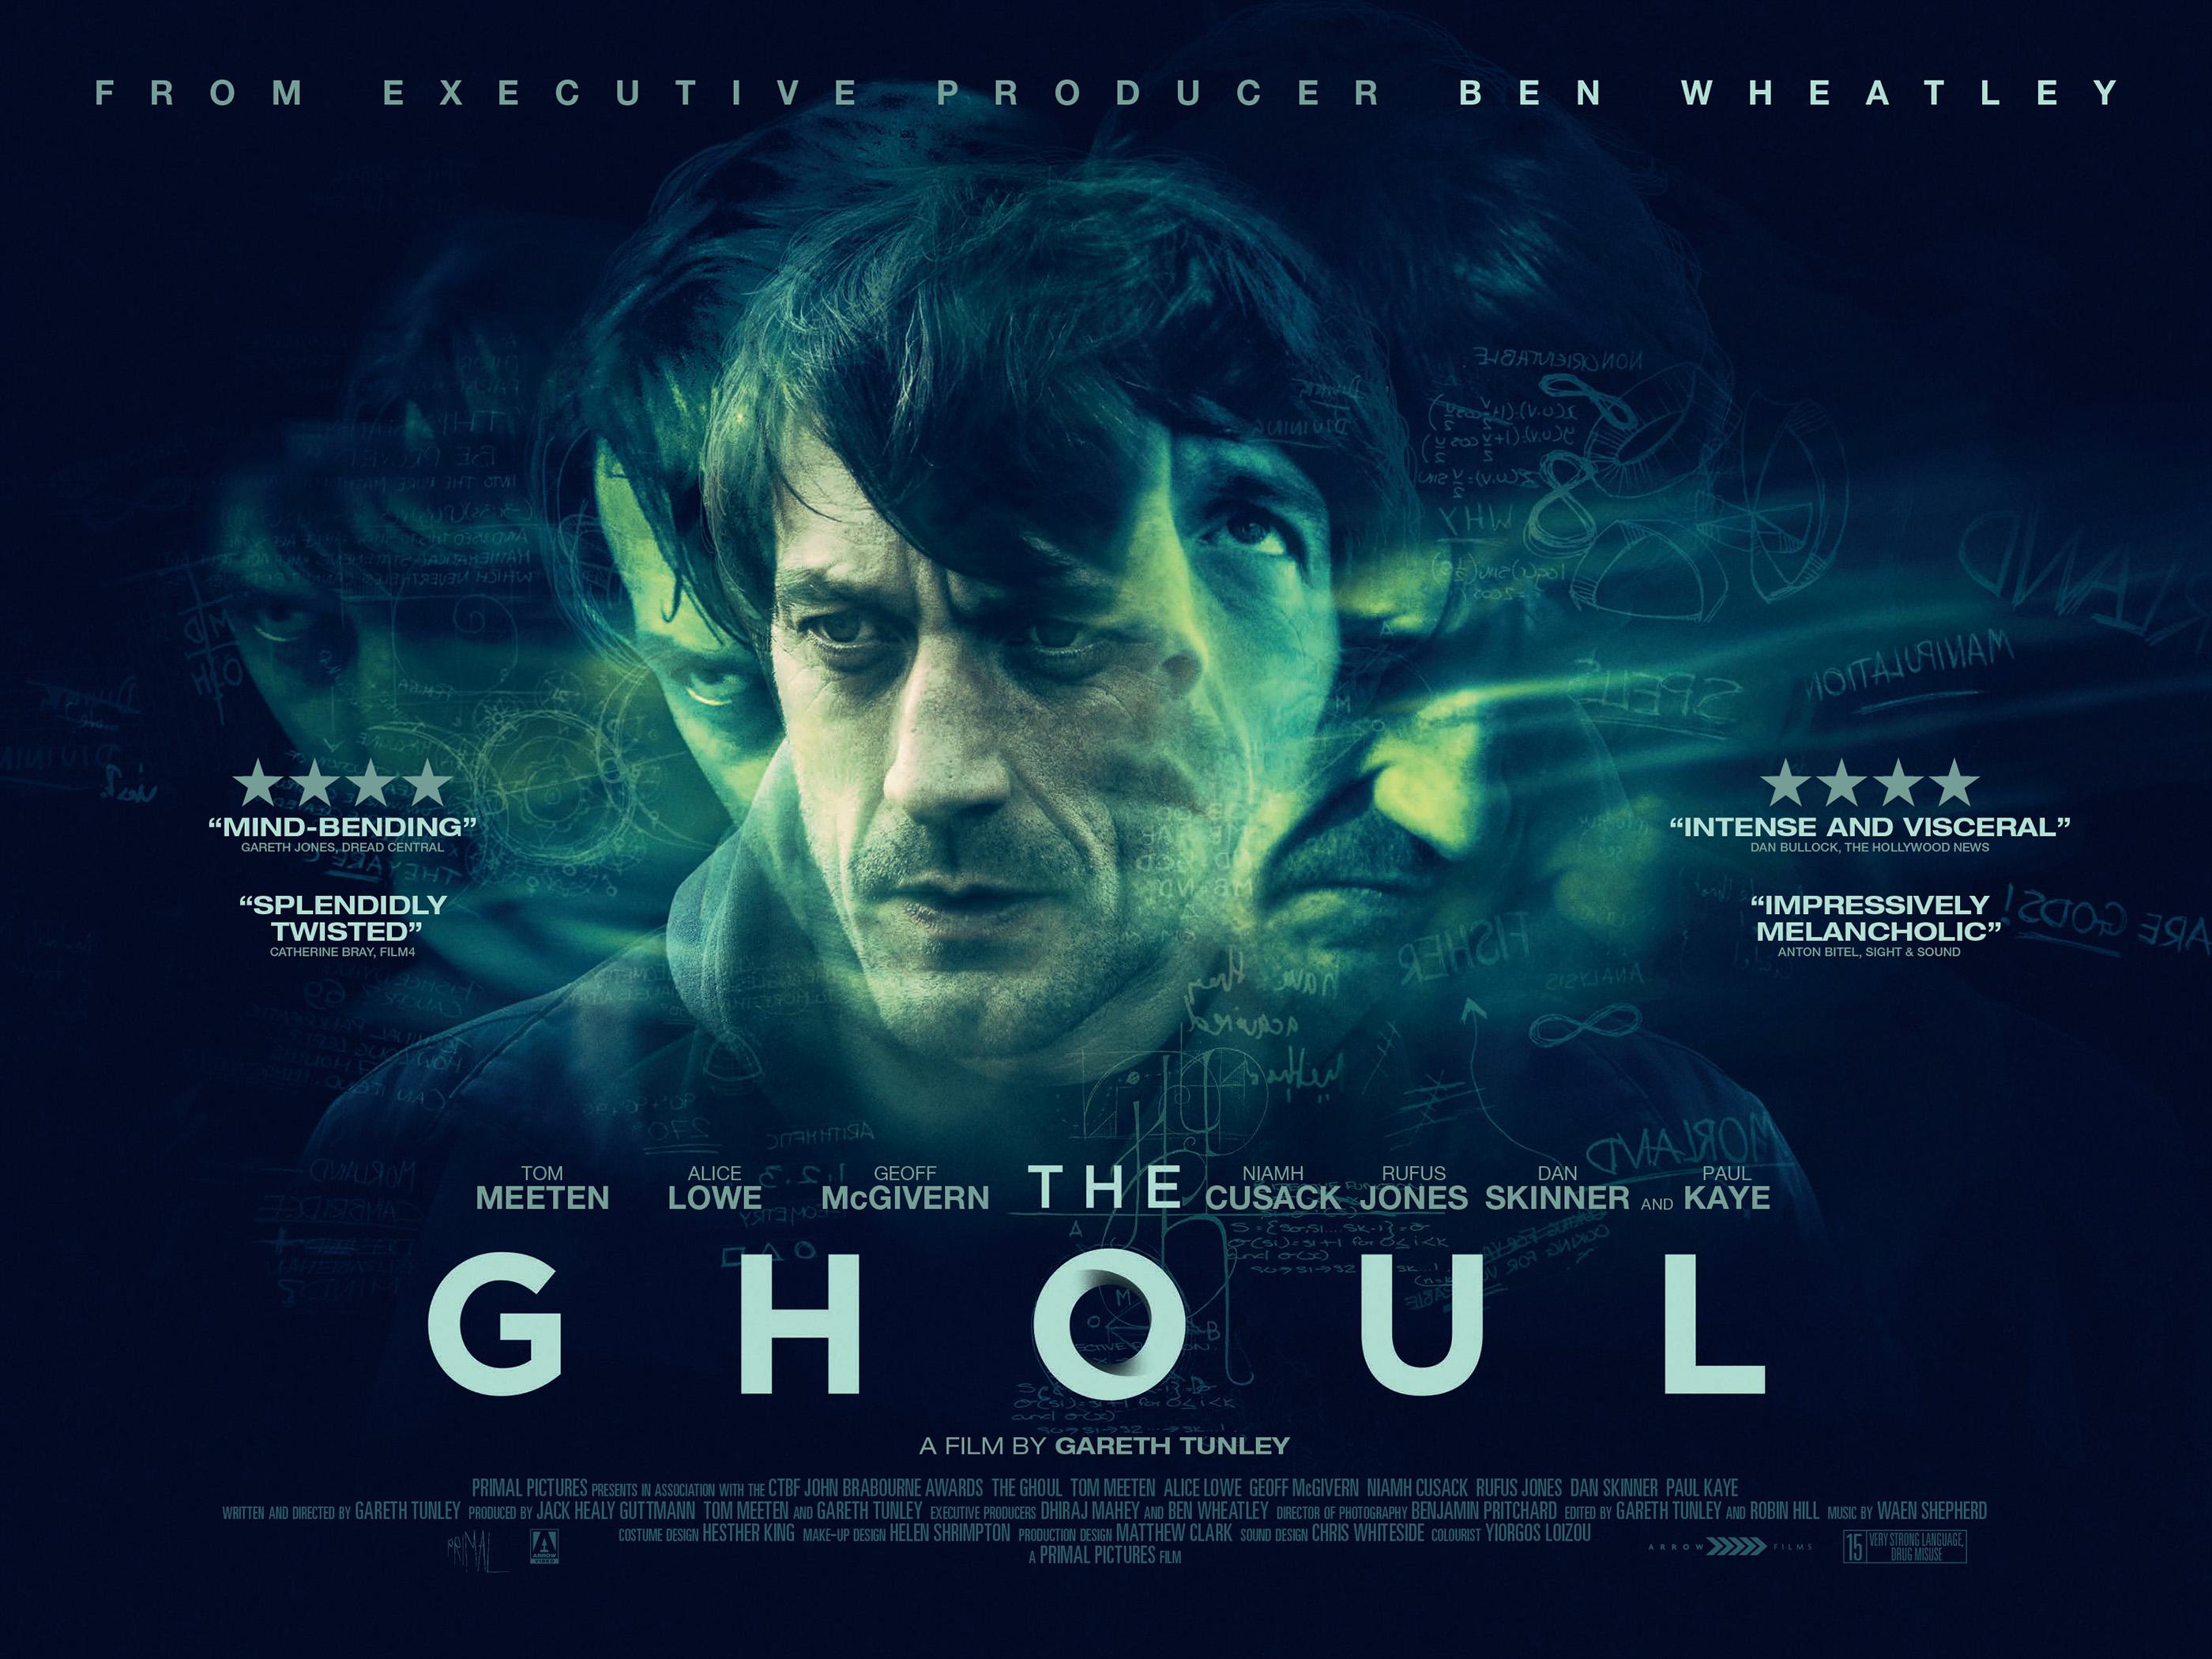 The Ghoul film review: a mind-bending London chiller